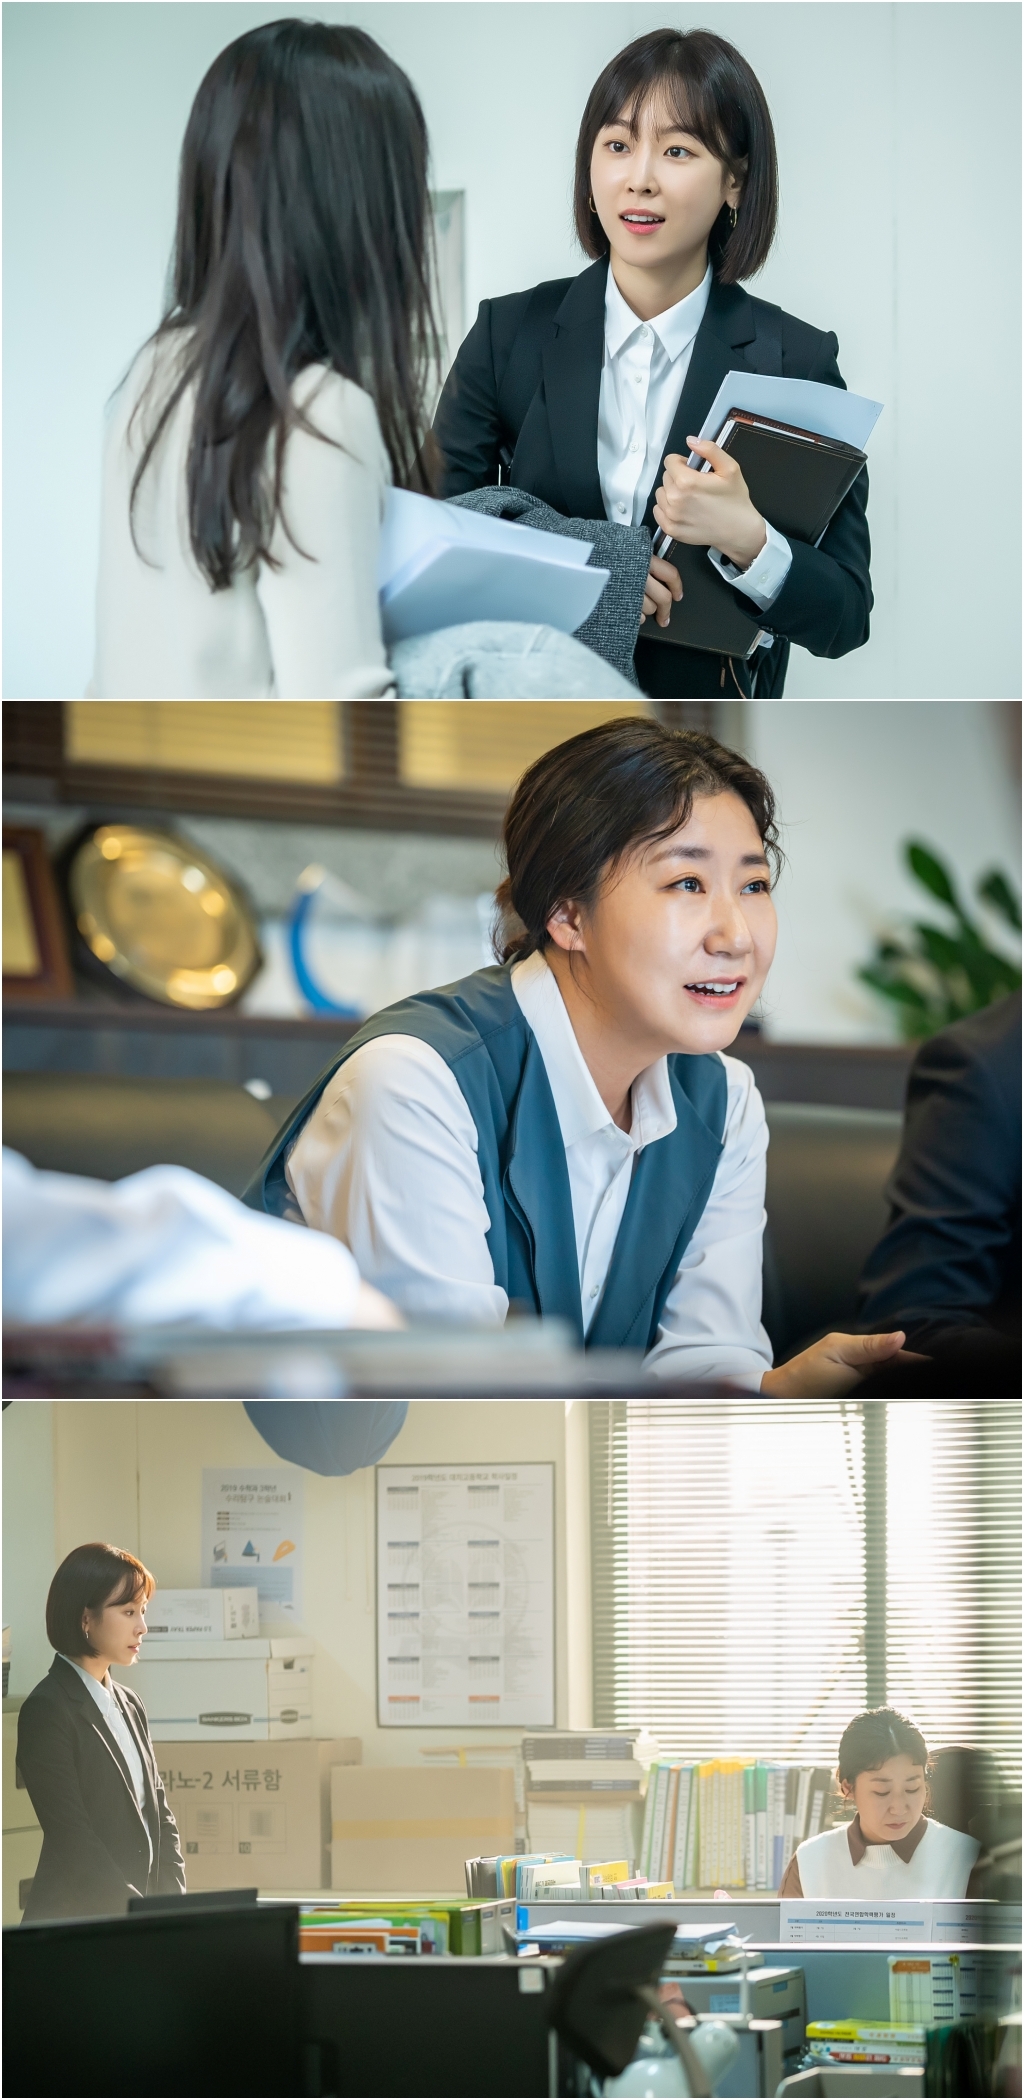 Seoul = = SteelSeries with images of Black Dog Seo Hyun-jin and Ra Mi-ran were first unveiled.On December 16, TVNs new monthly drama Black Dog (playplayplay by Park Joo-yeon/directed by Hwang Joon-hyuk/production studio Dragon, Earl Works), which will be broadcasted at 9:30 Och, unveiled the first Steel Series of Seo Hyun-jin and Ra Mi-ran in a reality-friendly character on the 15th.Black Dog is a story in which a socially early-aged high-rise (Seo Hyun-jin), who became a fixed-term teacher, struggles to survive by keeping his dreams in school, a microcosm of our lives.I will look closely at their real feelings through a fixed-term teacher who knows the bitter taste of reality better than anyone else, not the school that I saw outside the frame.Unlike existing school materials, teachers will be put on the front to dissolve their veiled world in density.Here, the actors such as Seo Hyun-jin Ra Mi-ran, Ha Jun Lee Chang-hoon, Jung Hae-gyun, Kim Hong-pa, etc., are all on the show to enhance the reality and perfection of the drama.The 180-degree change of the Seo Hyun-jin and Ra Mi-ran in the public photos makes the drama fans excited.First, Seo Hyun-jin, who transformed into a new fixed-term teacher who became the first private high school to go to work, is famous for his high education.The neat hair, the smile of the early years of society, and the excitement in the sparkling eyes can be seen in the face of the new fixed-term teacher, who is unfamiliar and awkward, but who is not inferior to anyone with passion.Ra Mi-rans charisma, which transformed into Park Sung-soon, a well-known walker-holic and Daechi-dong entrance examination man, is also interesting.Park Sung-soon is a passionate teacher who does not mind clowning for students, goes to college entrance and plays the role of salesman.People are smiling well, but the sharpness that seems to penetrate the opponent adds to the question of the character.The cold atmosphere between the sky and Park Sung Soon in the ensuing photo also raises curiosity. The new teacher, Goh Sky, is nervous with his hands gathered in front of Park Sung Soon, the head of the department.The contrast between two other people stimulates curiosity in their relationship.Seo Hyun-jin said of his acting breathing with Ra Mi-ran: I think breathing is good.I do not think so, but I always see the whole thing, and the words that are thrown as if I pass by are hints of Acting, and I feel that these are your inner circles.And you sing constantly in the field, and it is your charm. Ra Mi-ran also said: Seo Hyun-jin actor and breathing are nagging, always happy to come to the scene in a cheerful shooting scene atmosphere.I hope it will be a meaningful story that is sympathetic to viewers as well, he said, stimulating expectations.